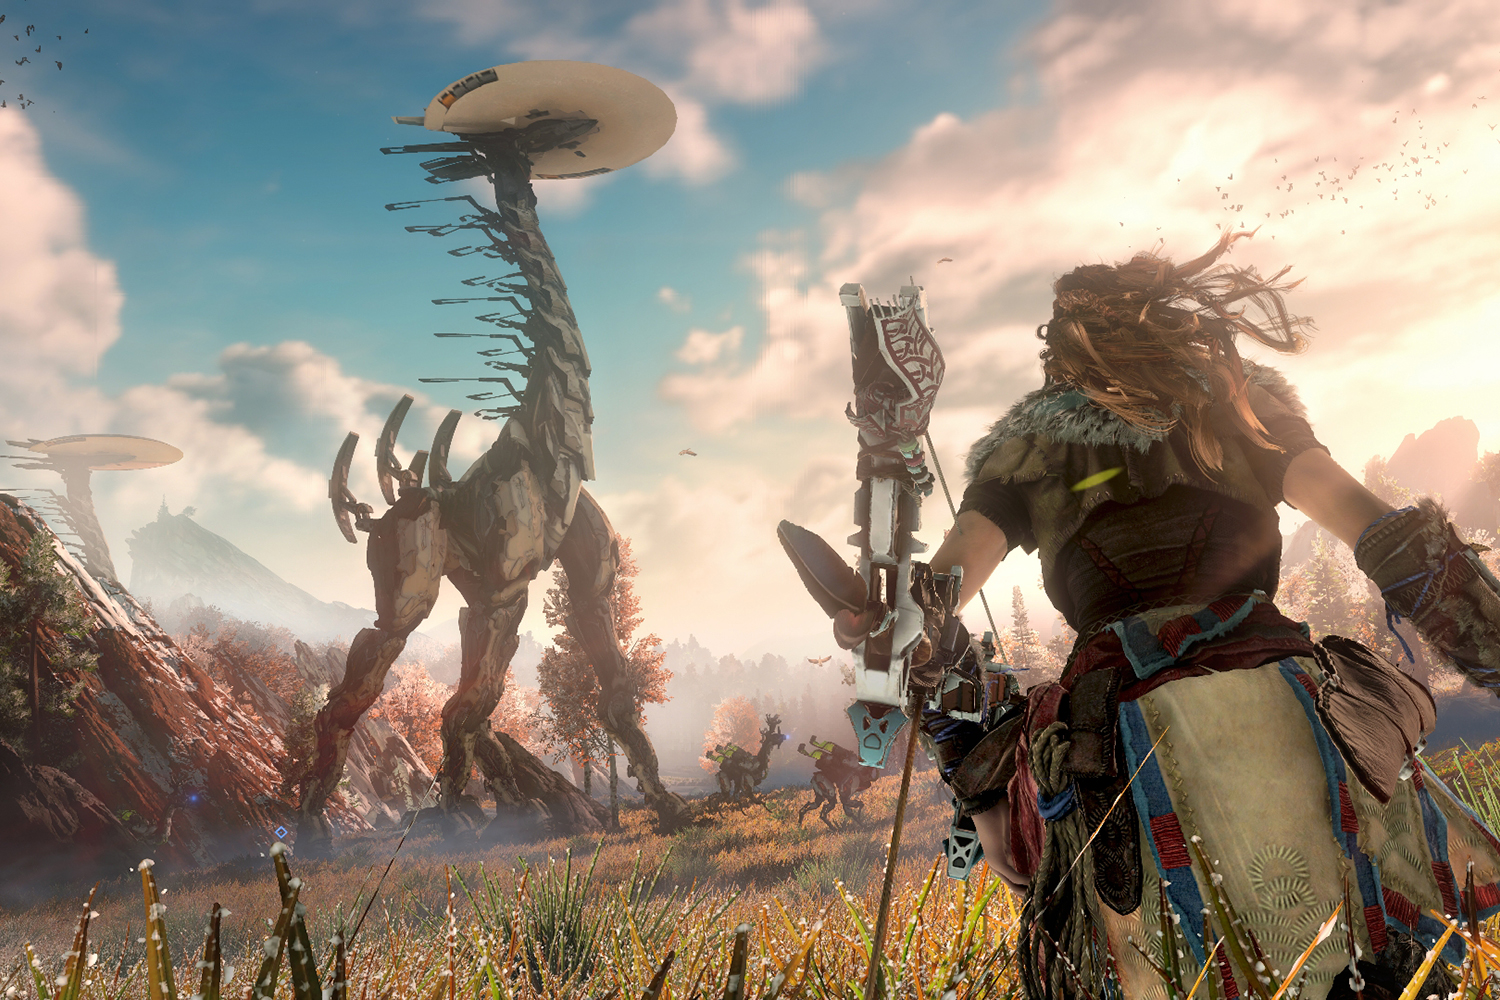 Horizon Zero Dawn: 10 Weapons & Add-Ons That Make The Game Way Too Easy